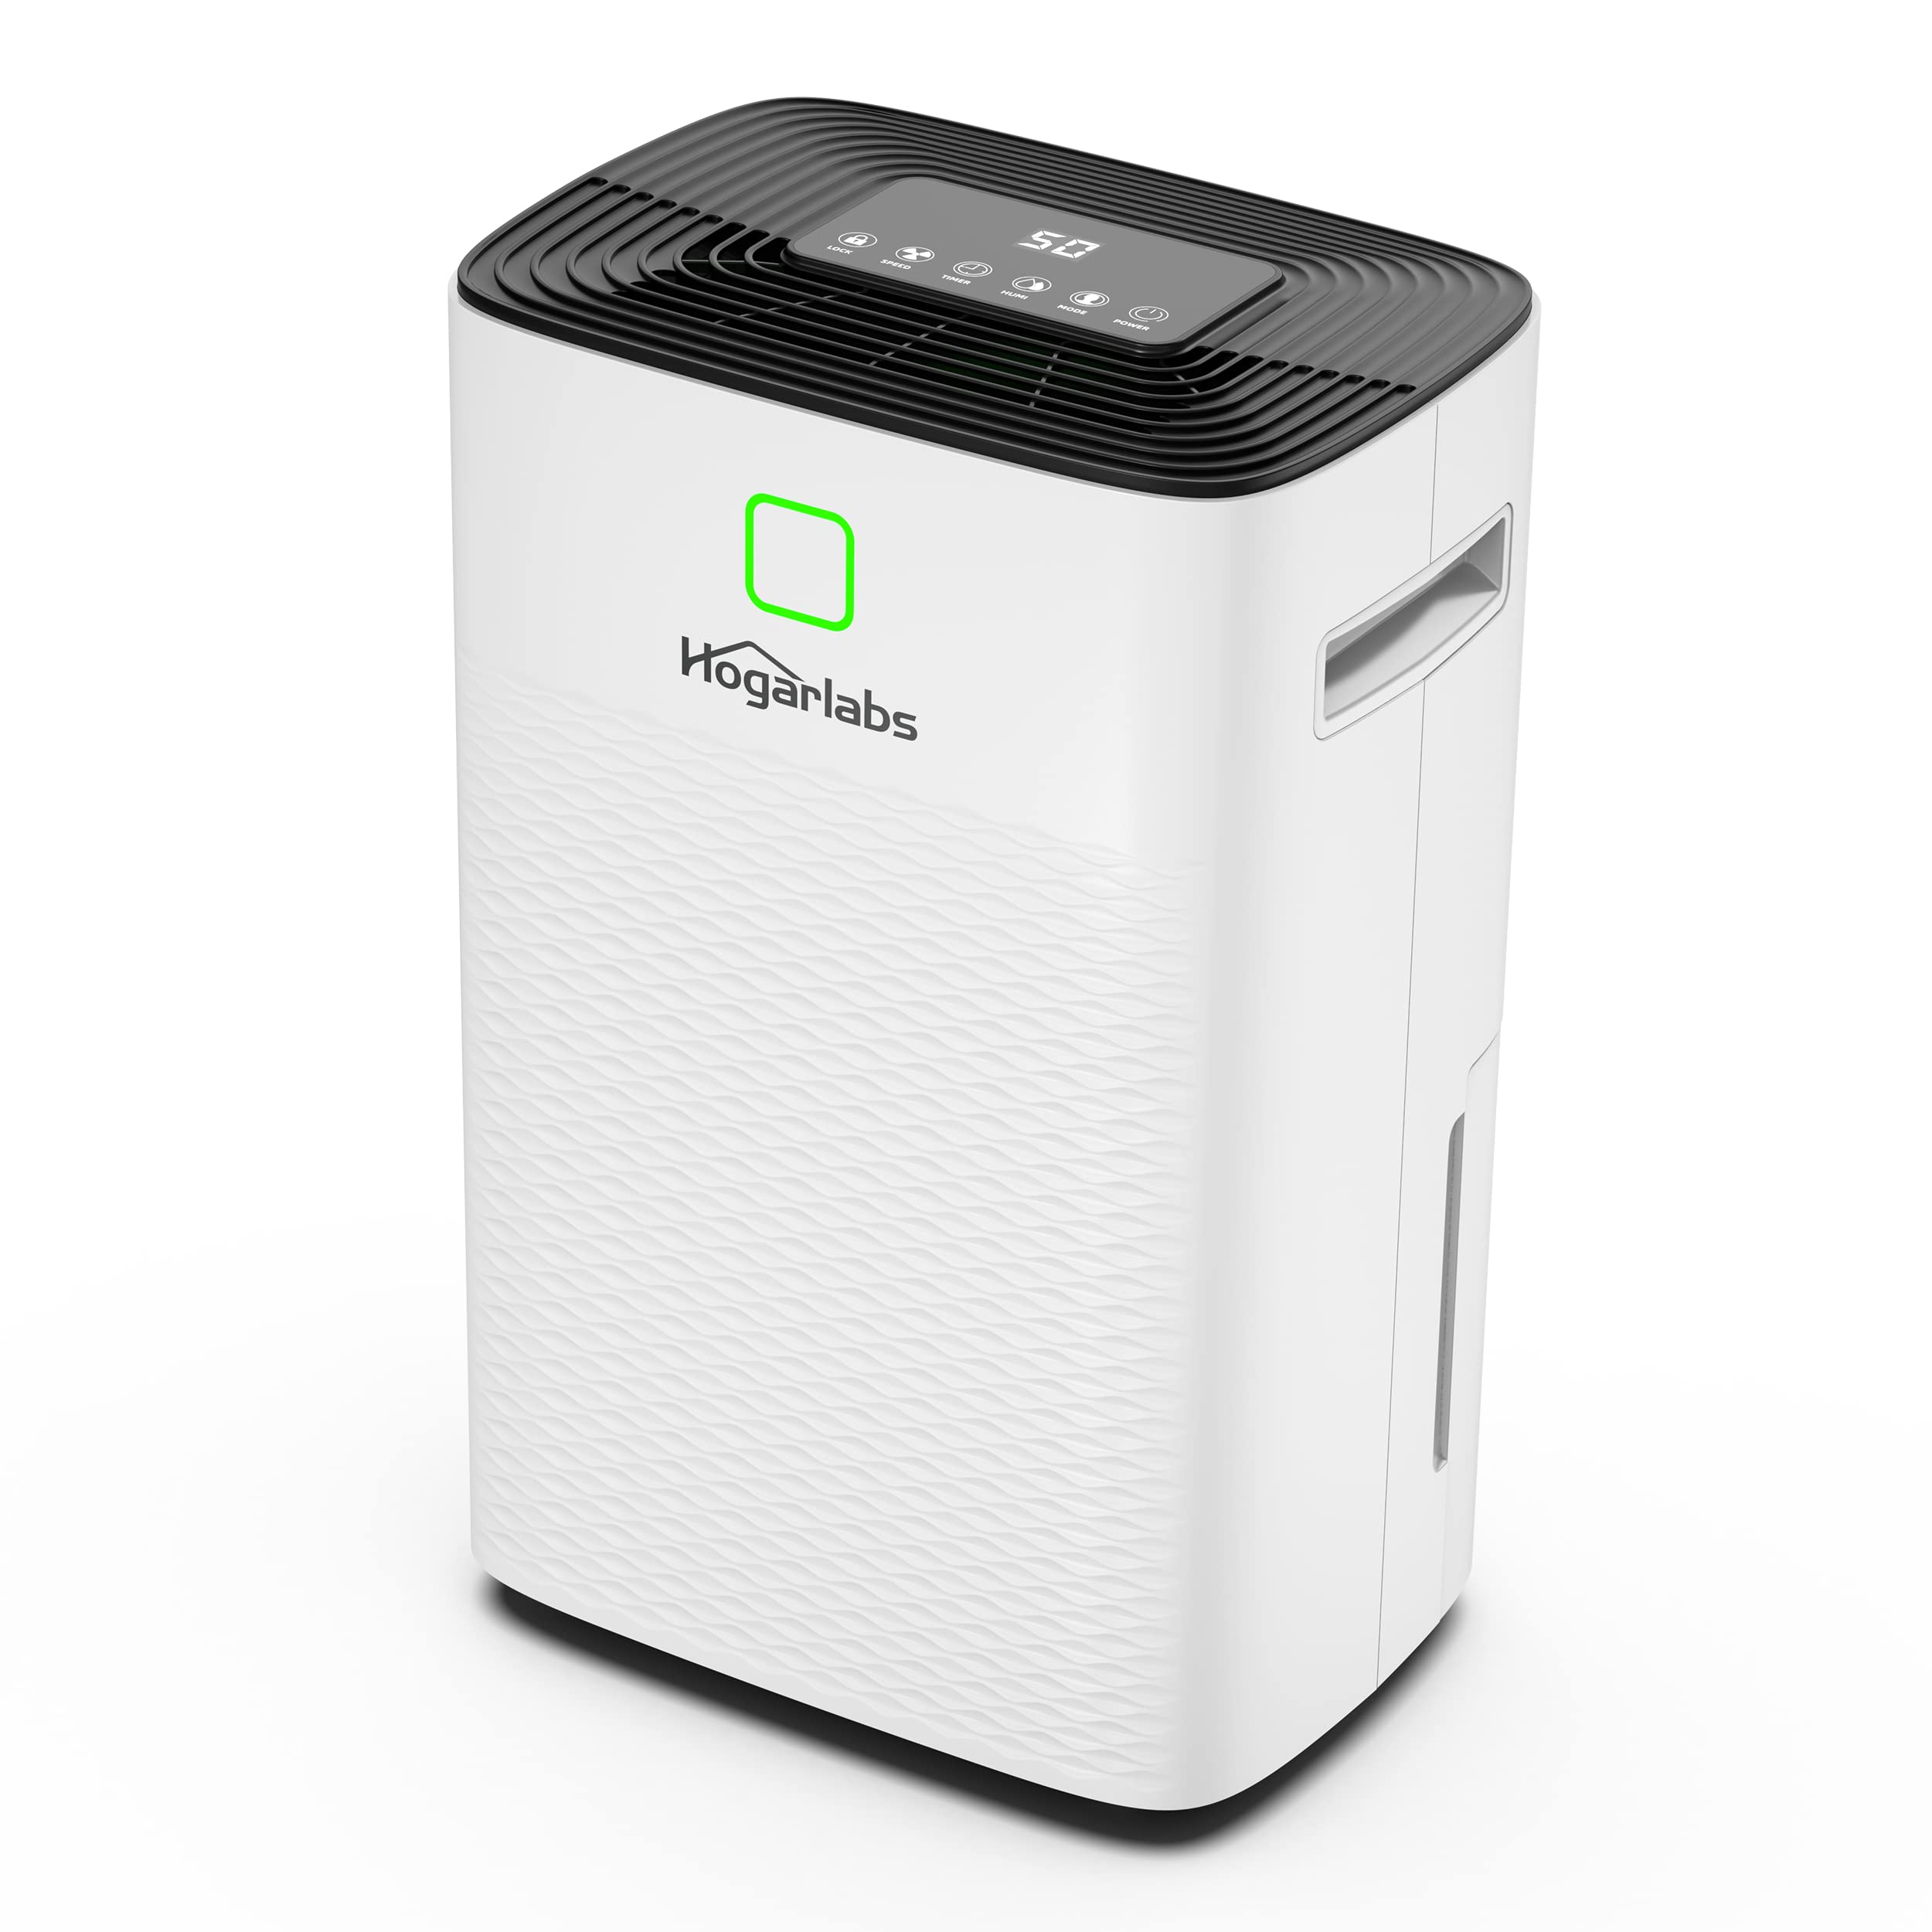 HOGARLABS 30 Pint Dehumidifiers Up to 2000 Sq Ft for Continuous Dehumidify, Home Dehumidifier with Digital Control Panel and Dra